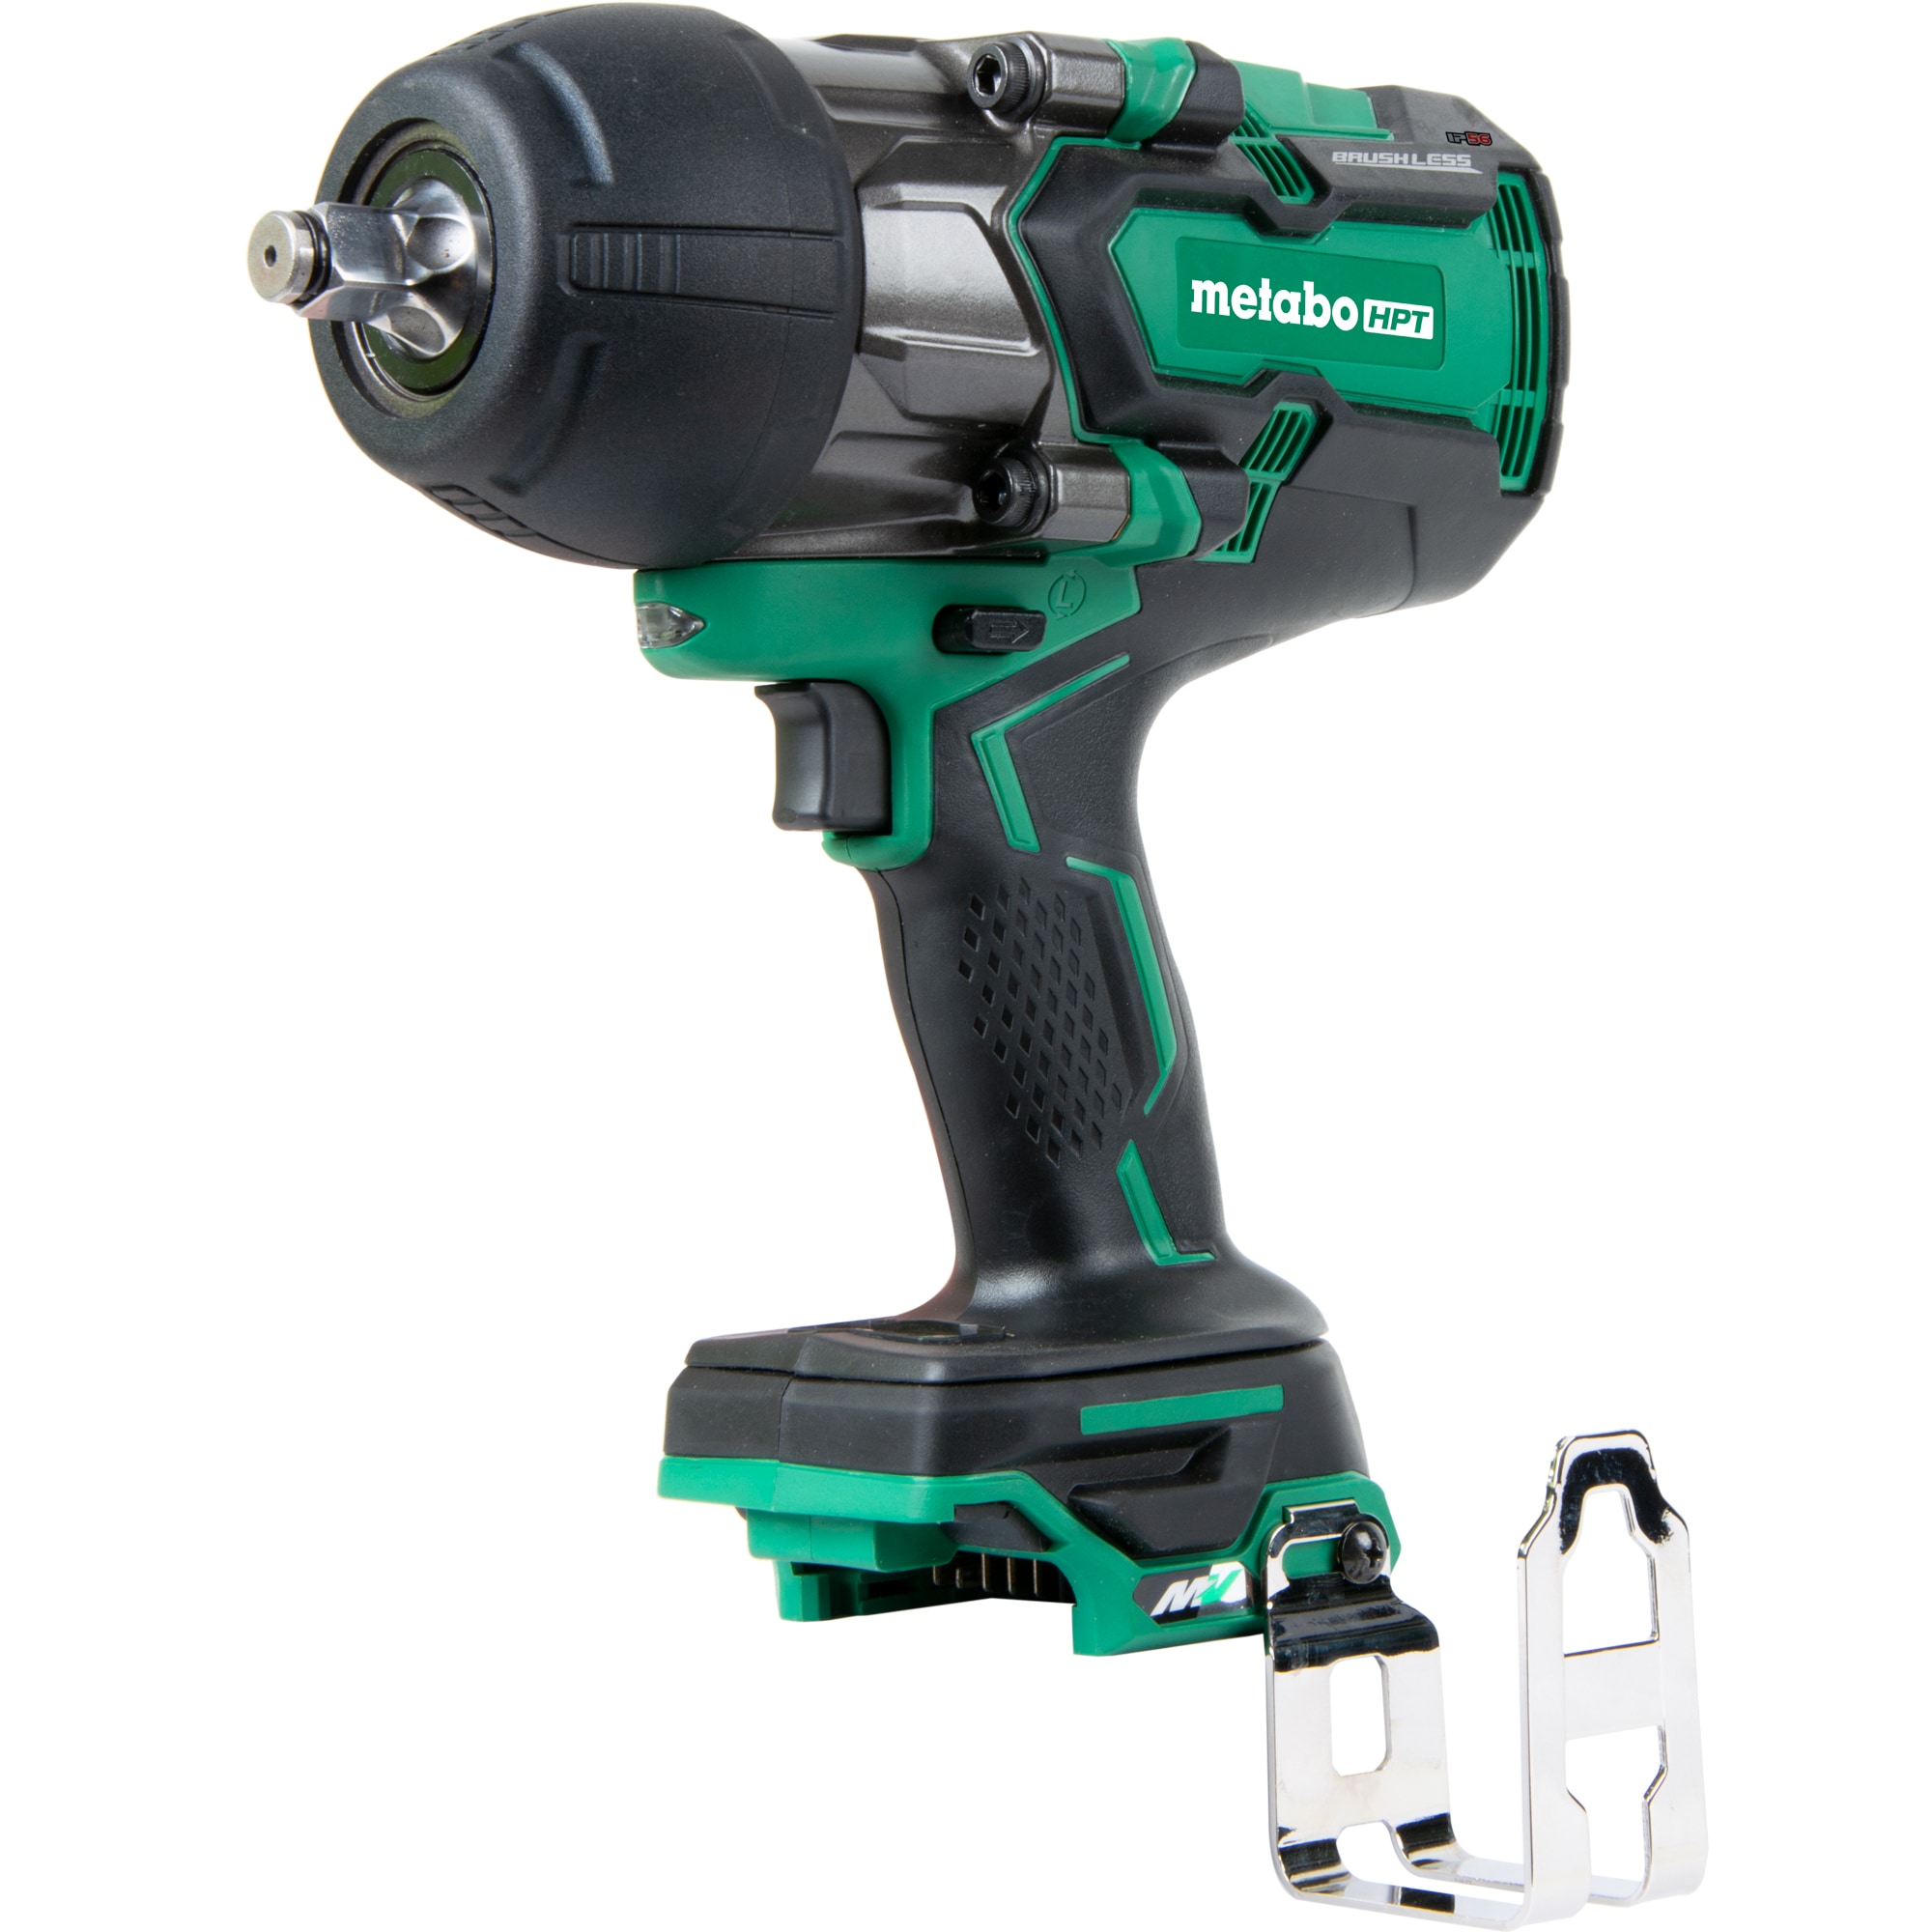 MultiVolt 36-volt Variable Speed Brushless 1/2-in square Drive Hybrid Cordless and Corded Impact Wrench (Bare Tool) in Green | - Metabo HPT WR36DBQ4M